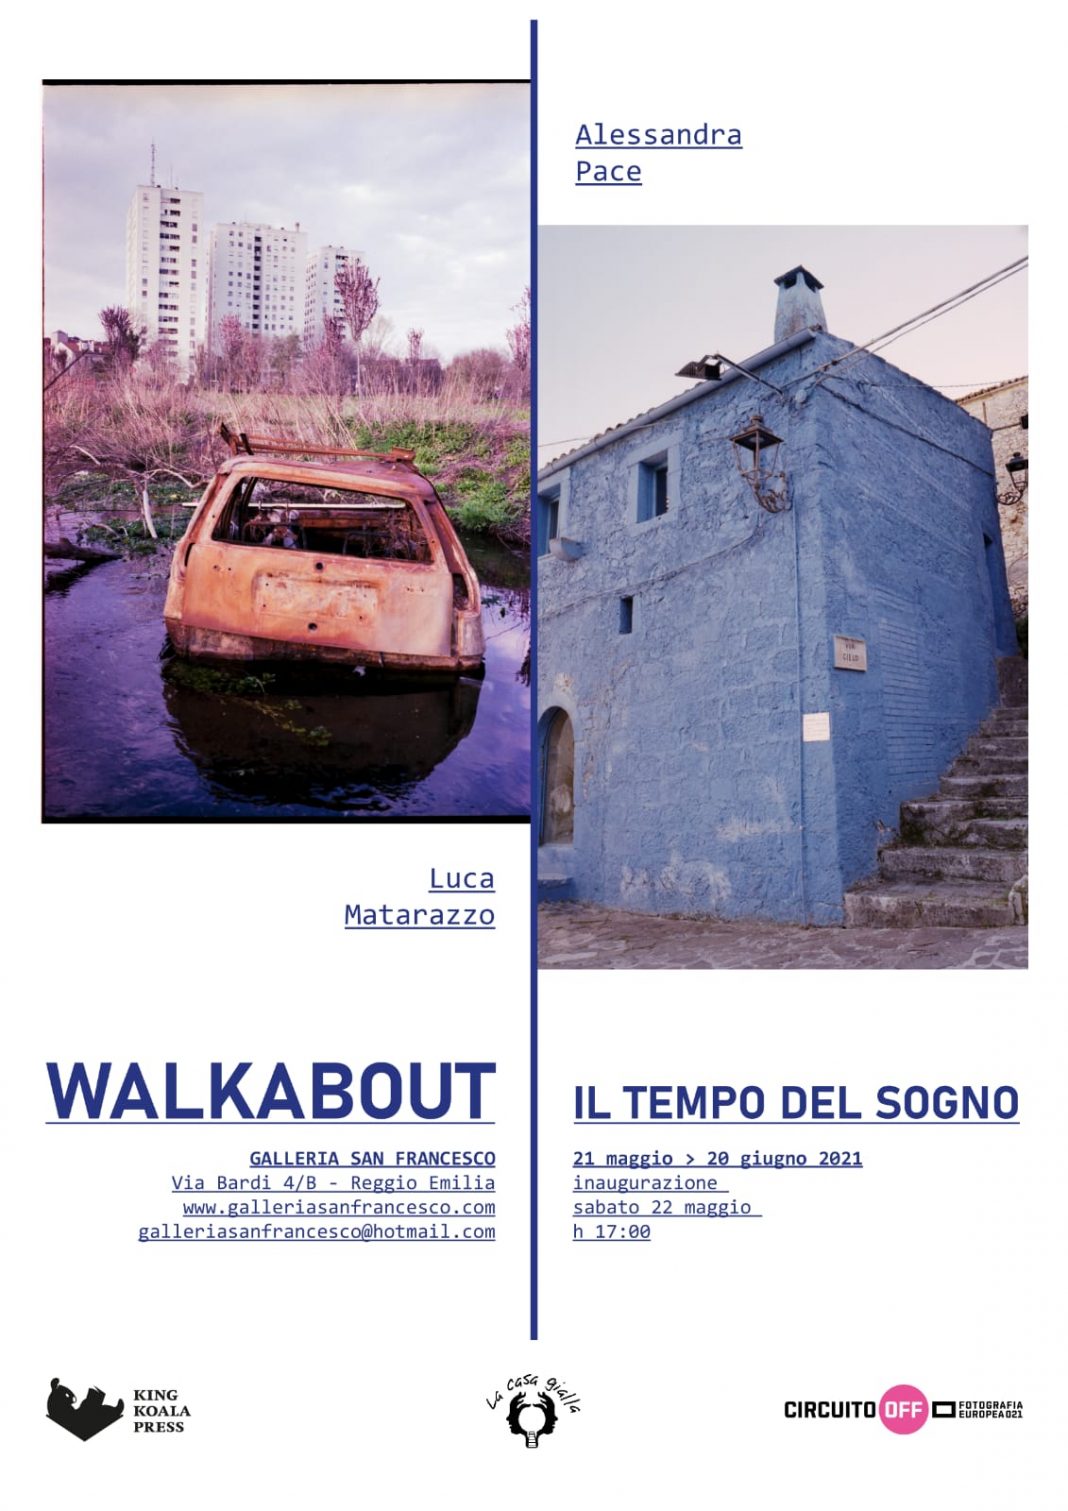 Alessandra Pace / Luca Mata – Walkabout. Il tempo del sognohttps://www.exibart.com/repository/media/formidable/11/img/c86/WhatsApp-Image-2021-05-13-at-20.41.45-2-1068x1511.jpeg